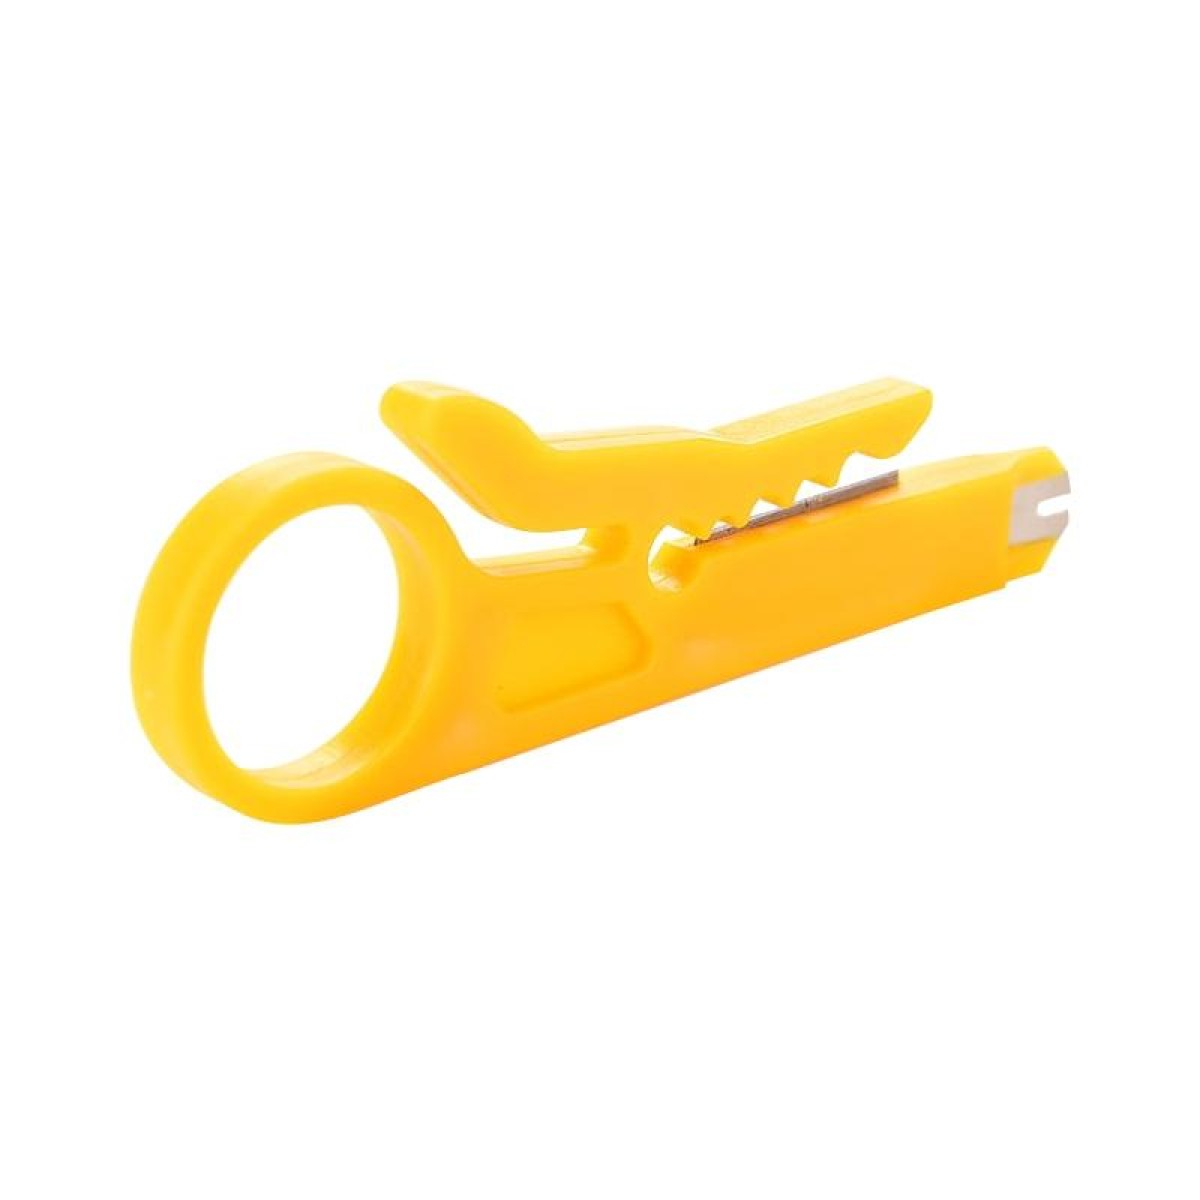 5 PCS Mini Network Cable Plier Yellow Cable Cutter